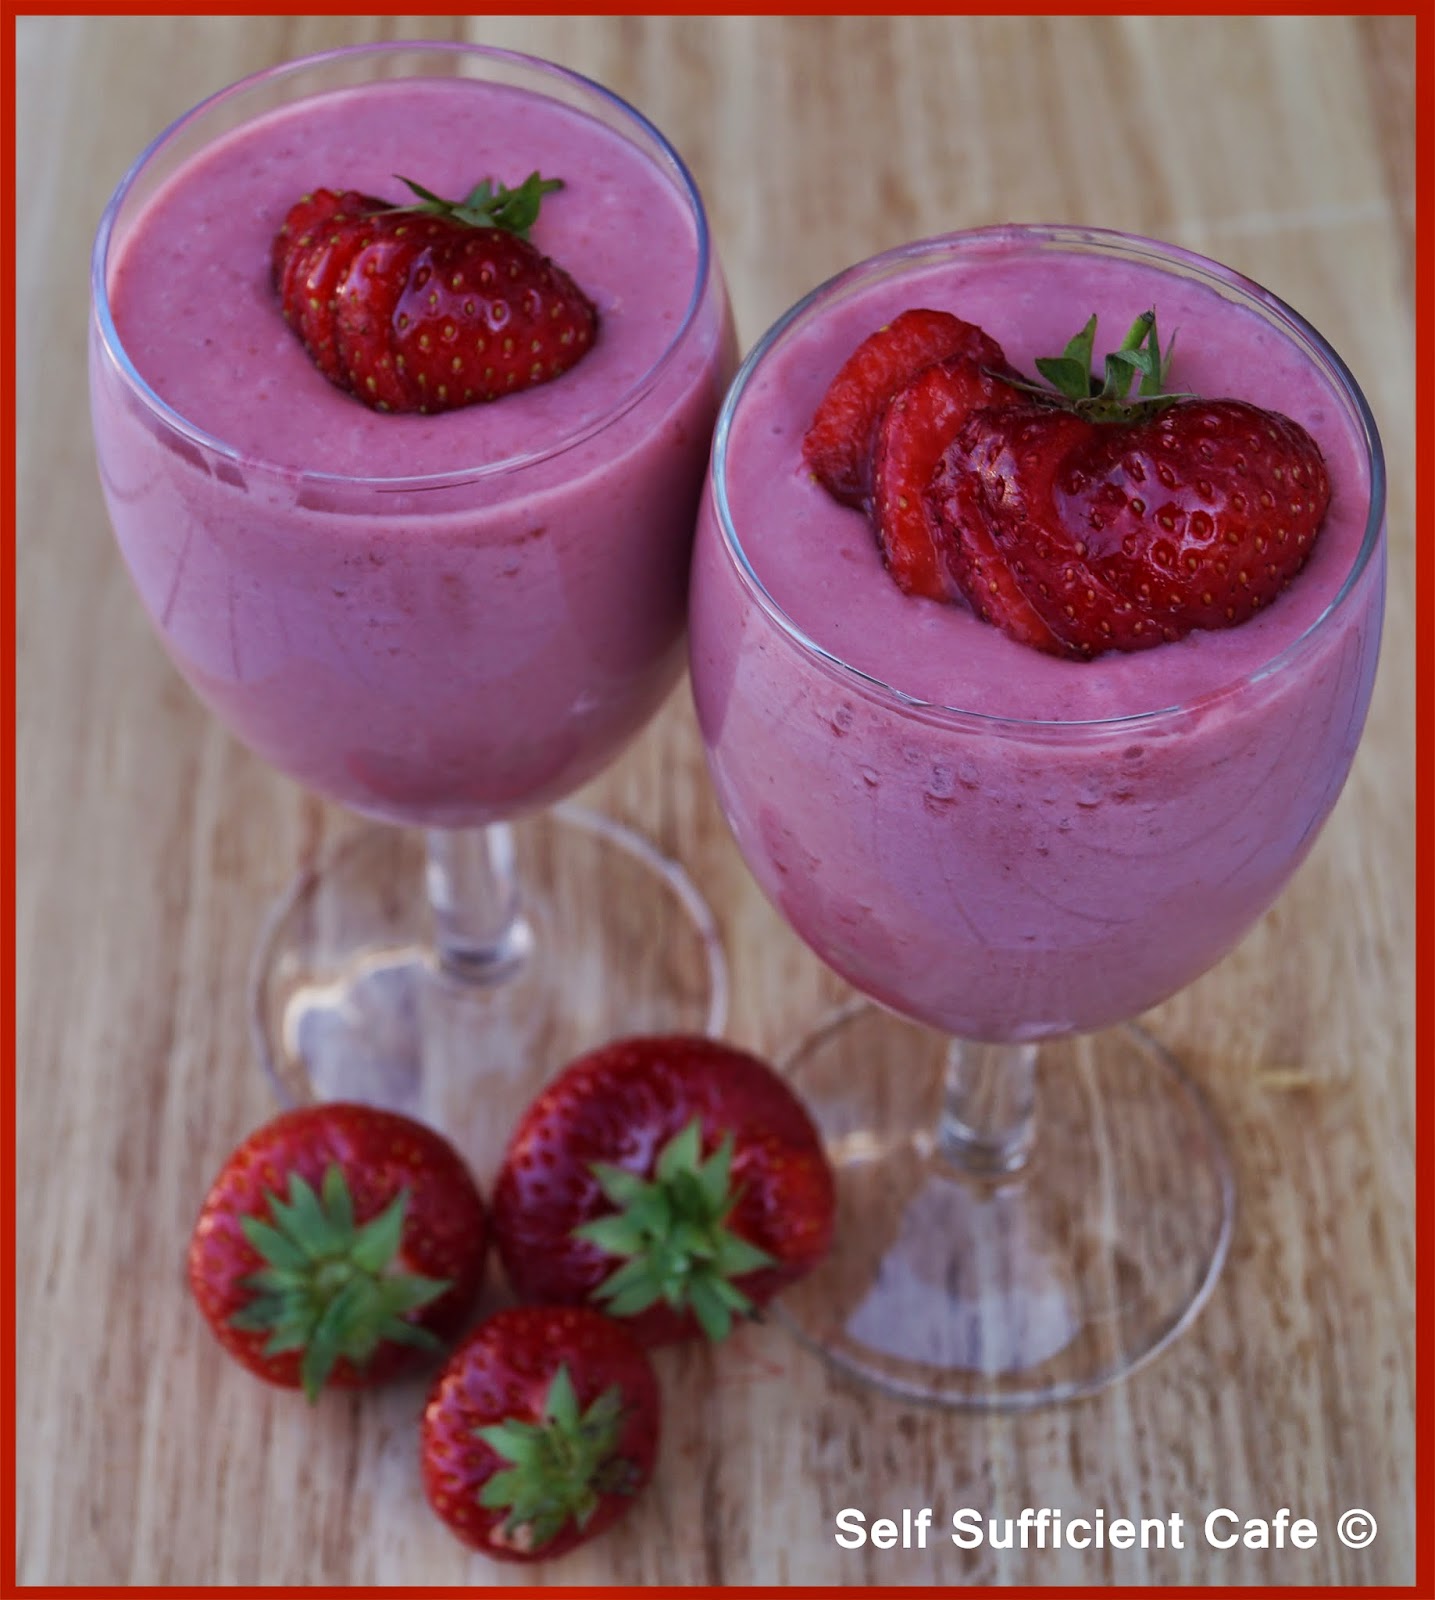 Self Sufficient Cafe: Strawberry Mousse